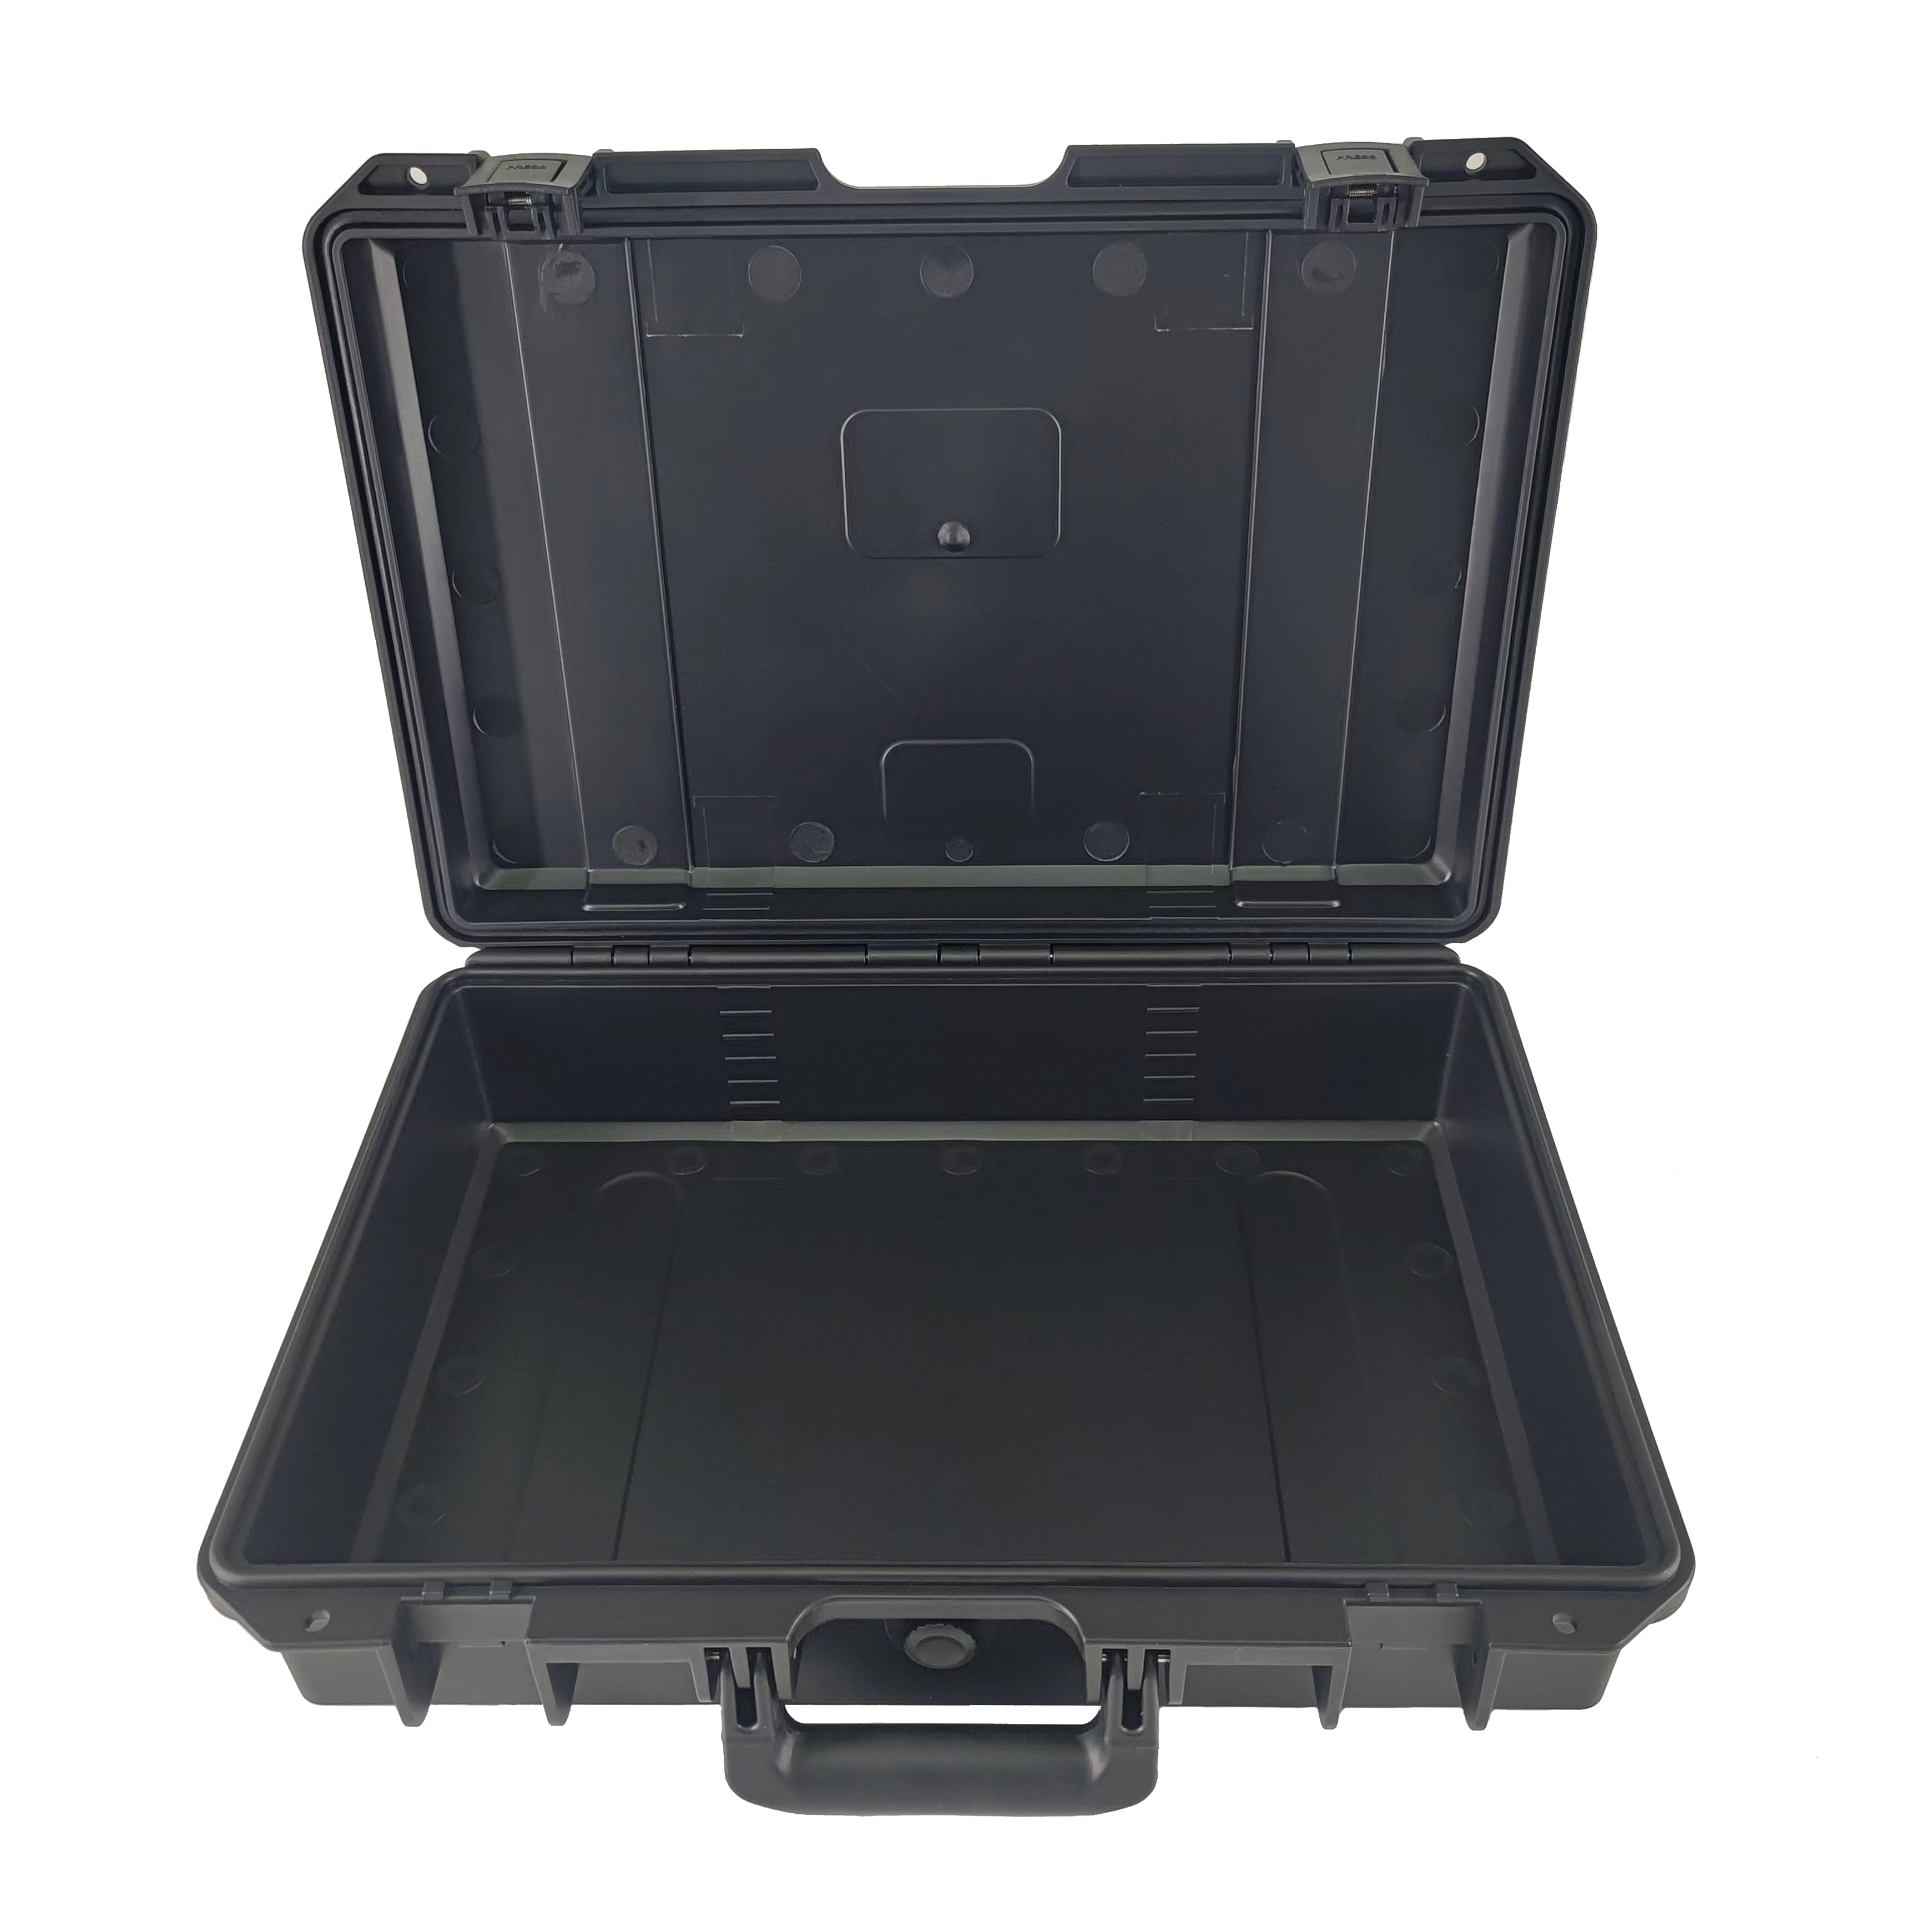 [BP-F4429][440*290*165mm] Equipment Protective Case Carrying Case with Handle Hard-shell Plastic Case Waterproof Hard Carry Tool Case Plastic Waterproof Military Case